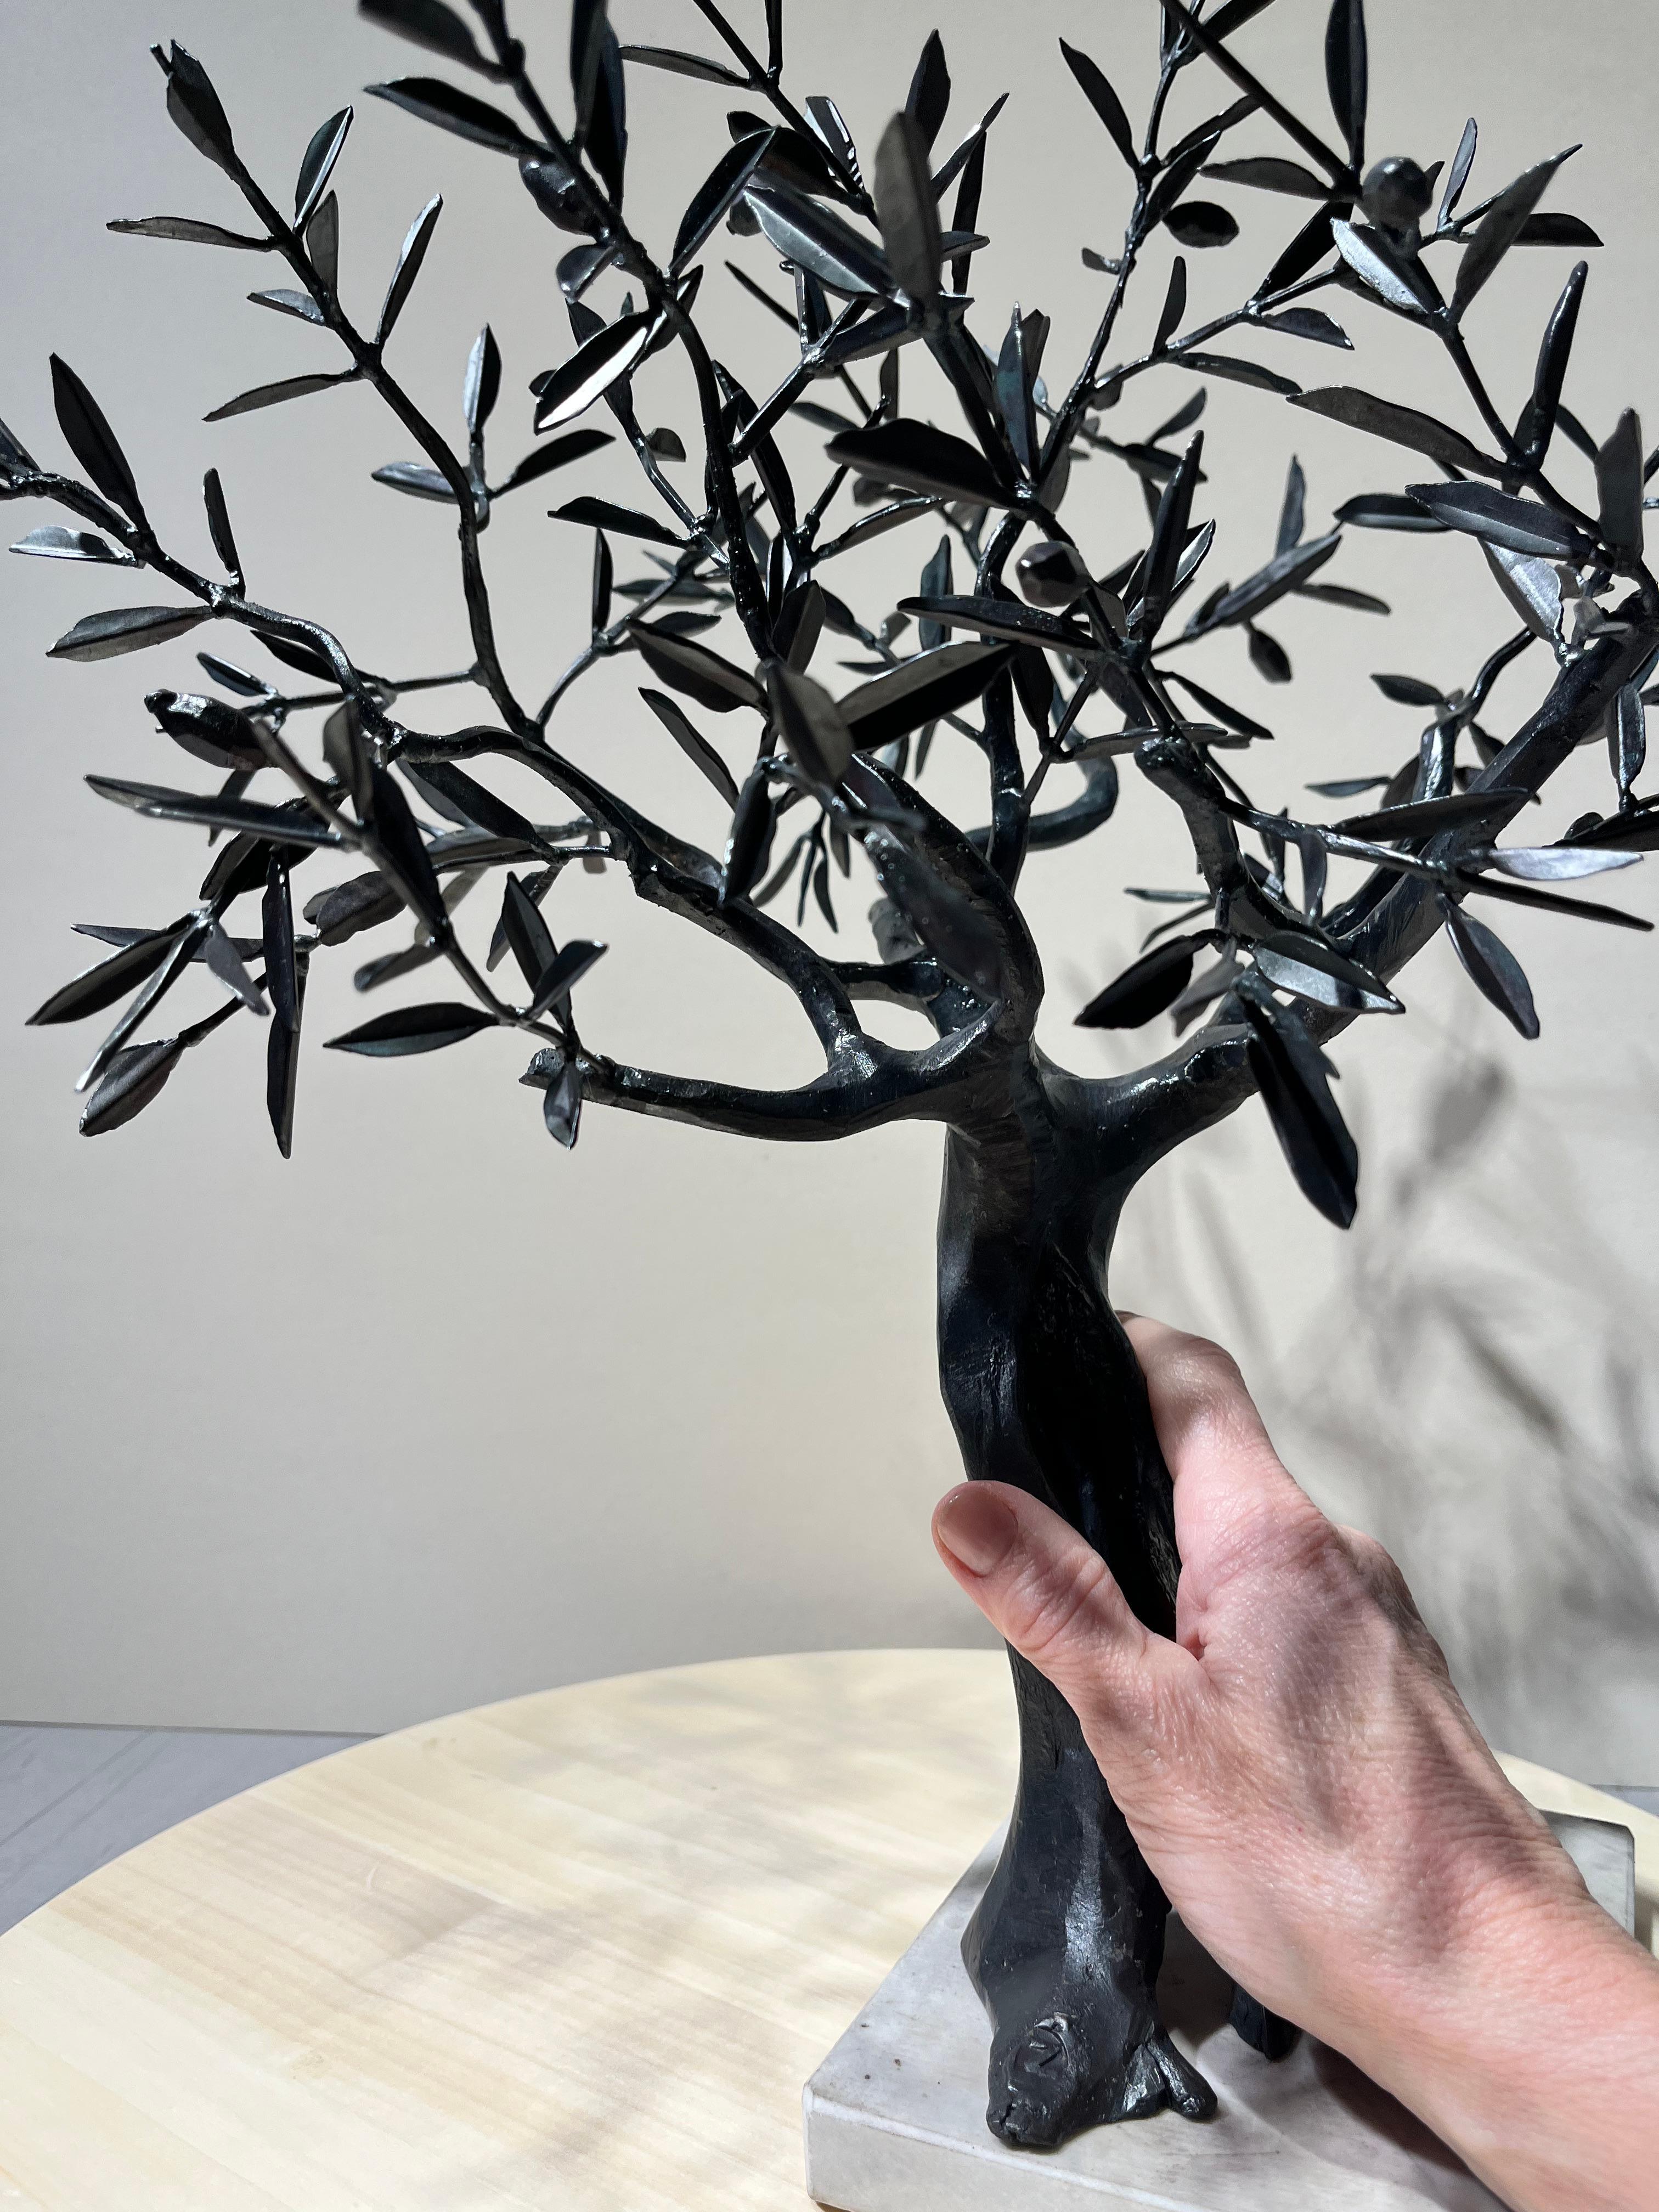 The Olive tree's unique piece forged in wrought iron is not replicable. It was created by one of the most significant contemporary worldwide artist-blacksmith. He is Italian. 

Fixed on a small white marble base, the sculpture, although small in